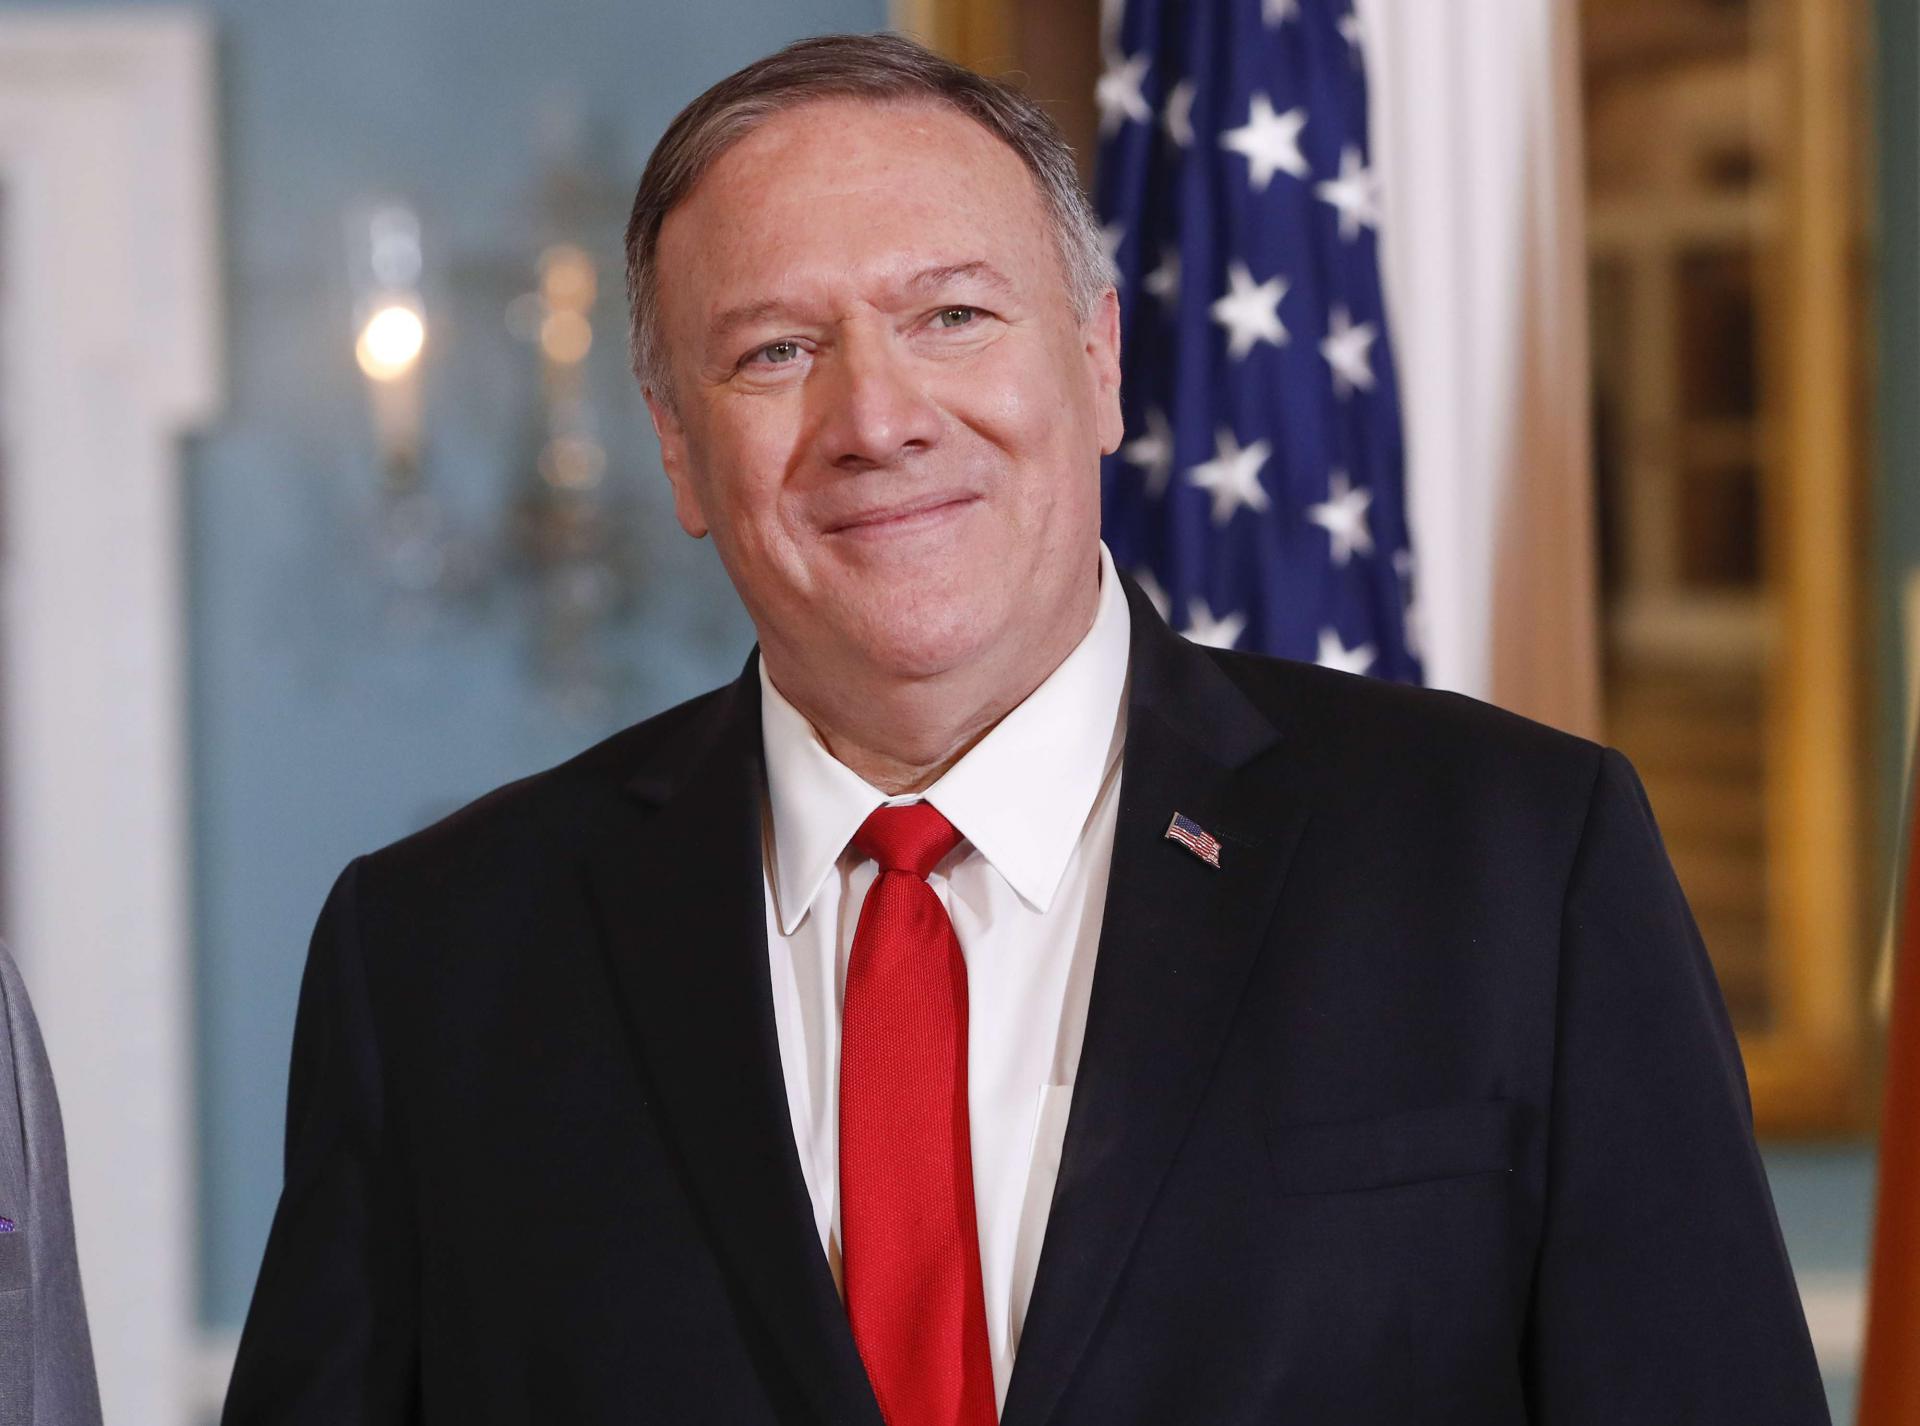 "Tehran is behind nearly 100 attacks on Saudi Arabia while Rouhani and Zarif pretend to engage in diplomacy," Pompeo said